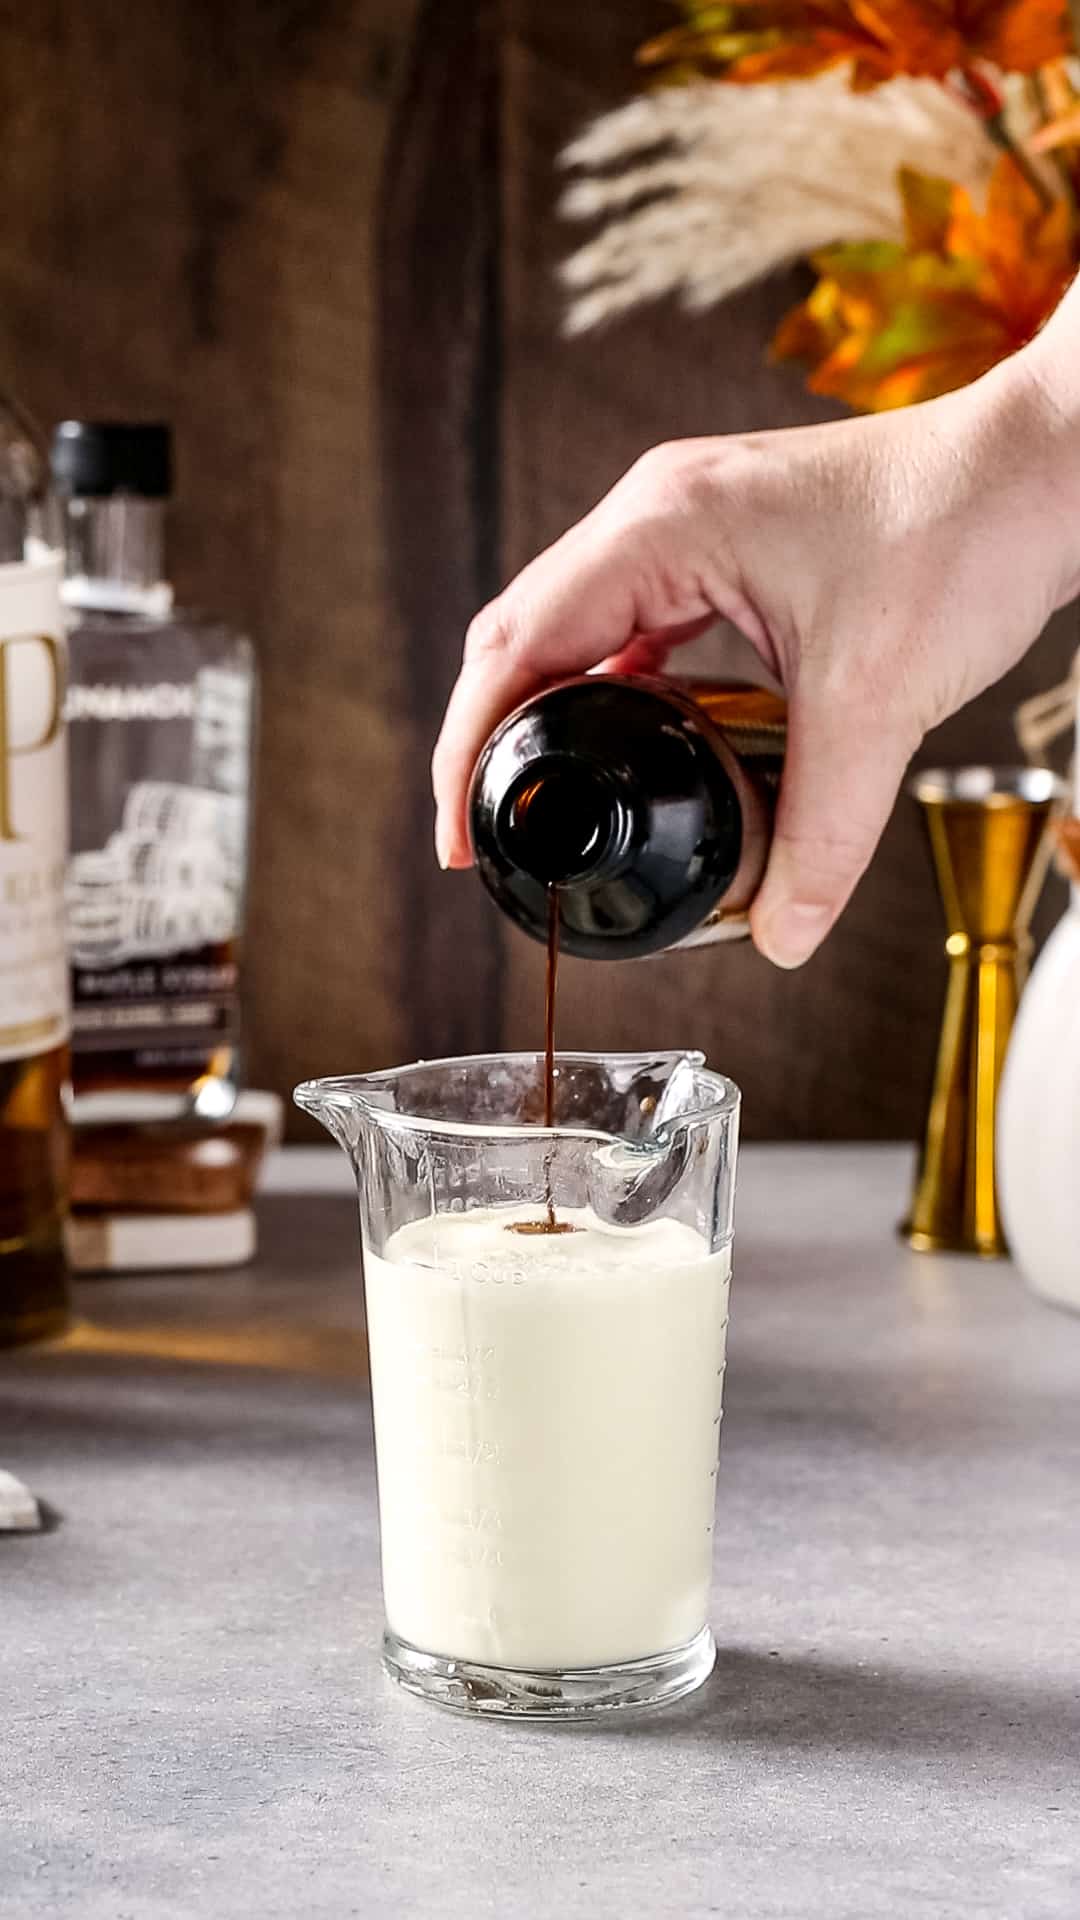 Hand pouring vanilla extract into a measuring cup filled with heavy cream.